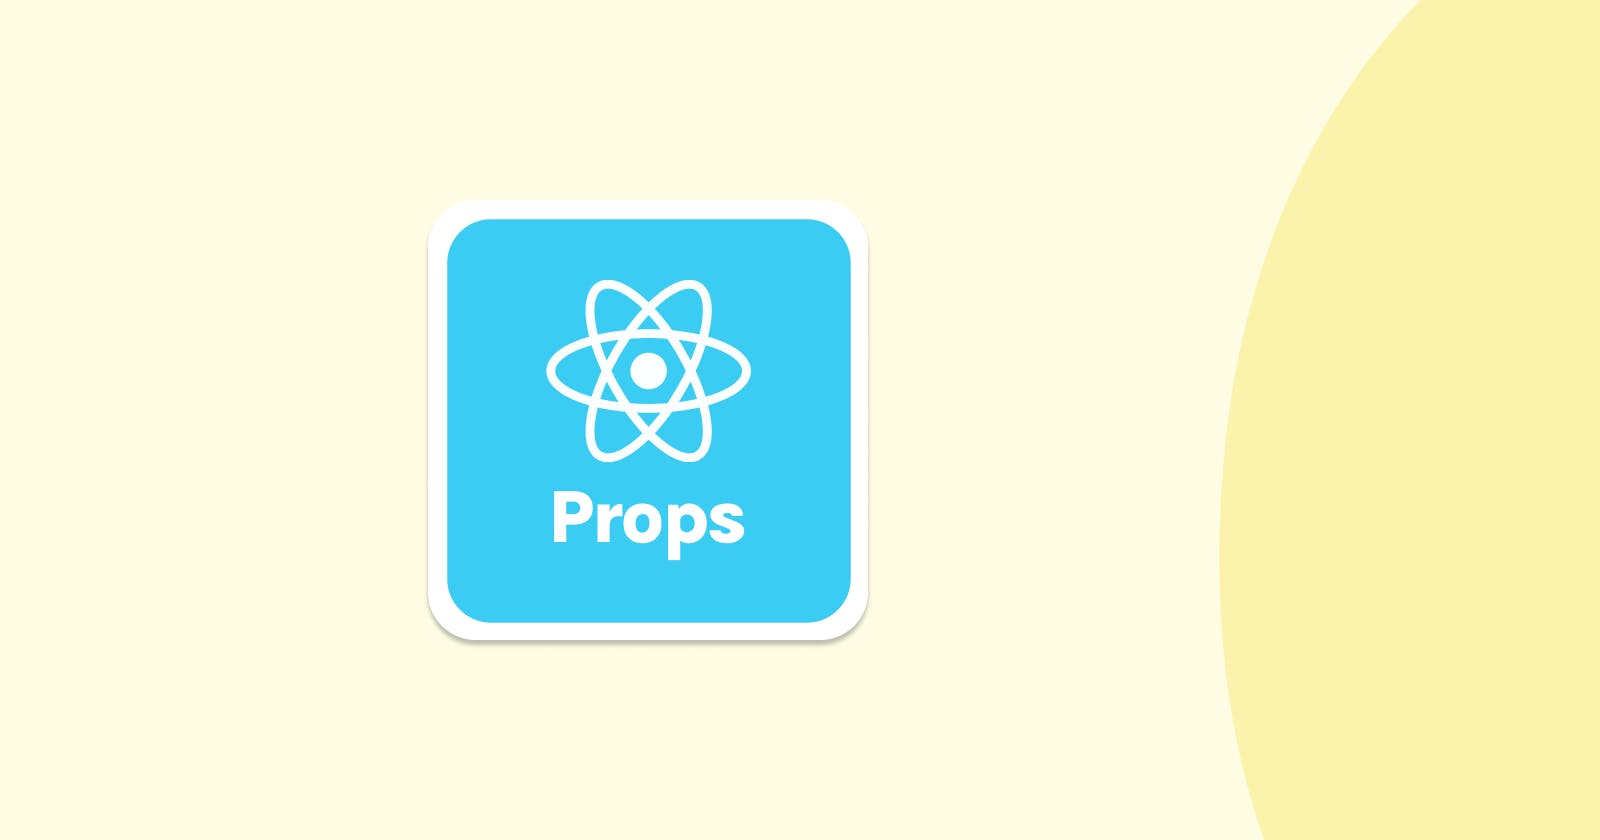 An introduction to React component props